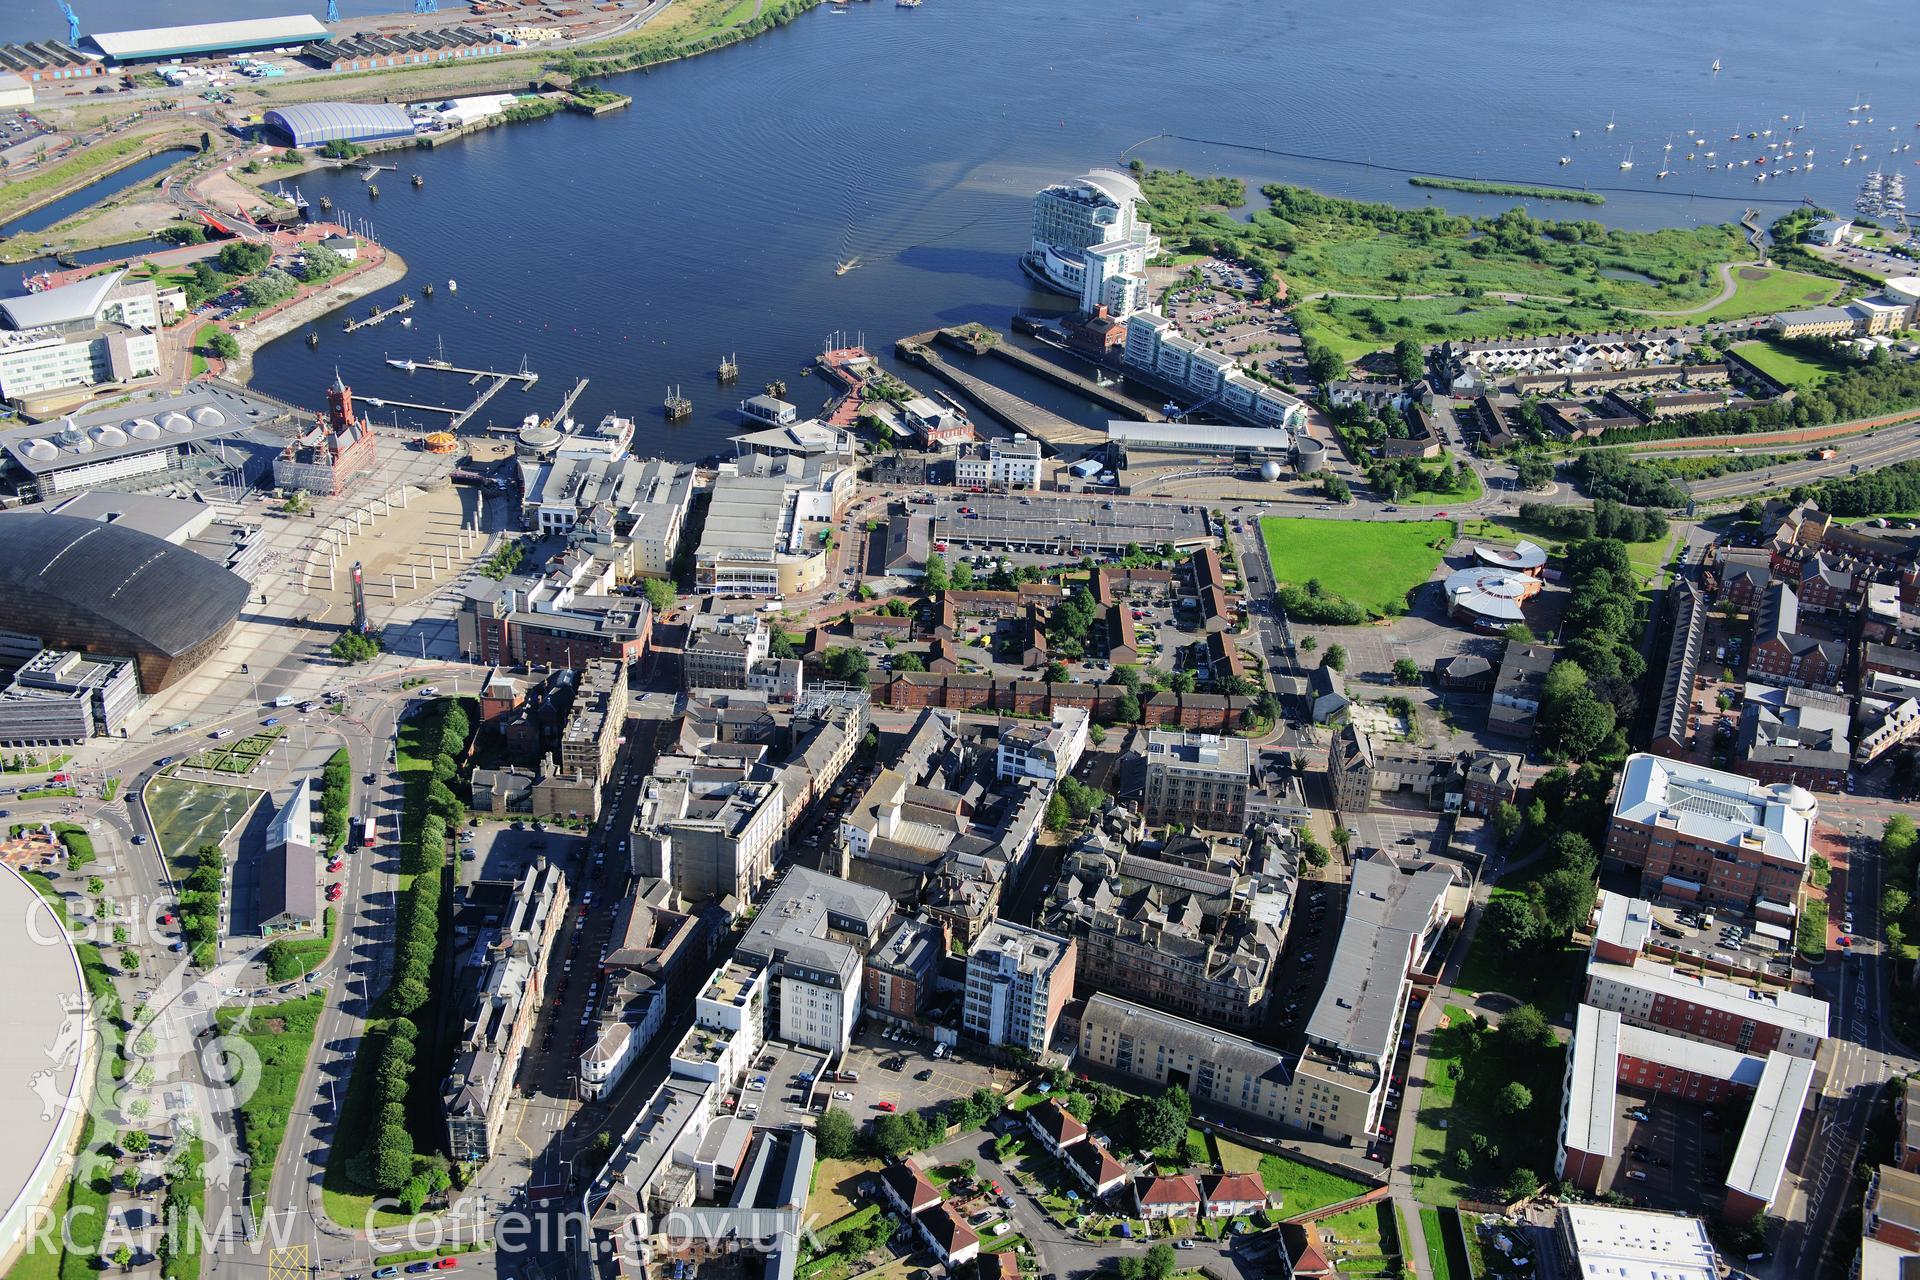 RCAHMW colour oblique photograph of Cardiff Bay, general view from north-east. Taken by Toby Driver on 24/07/2012.